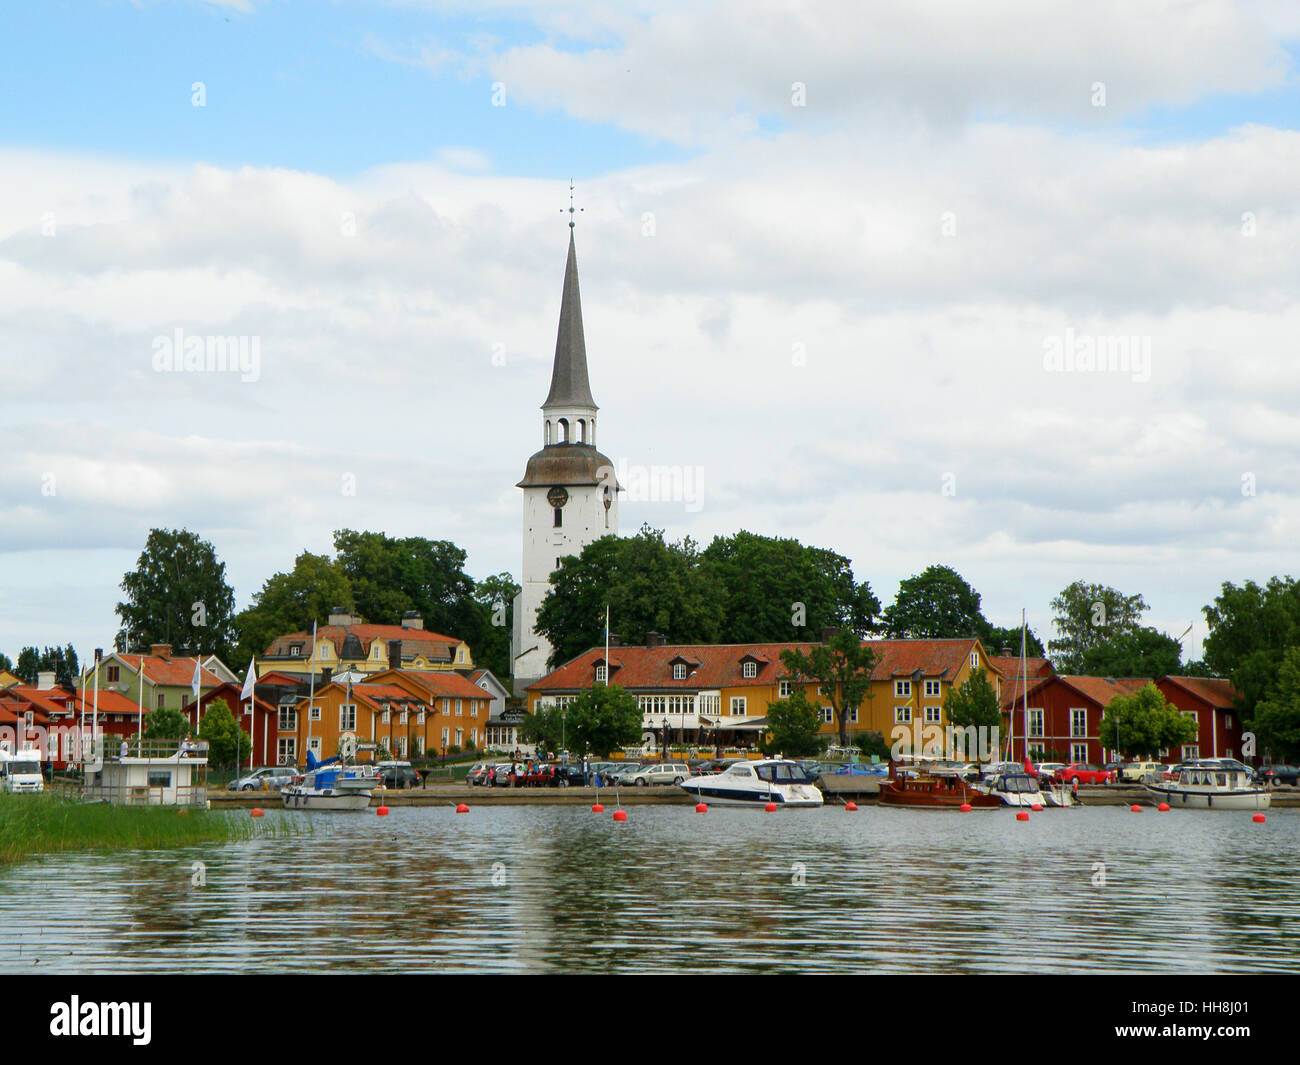 The picturesque Mariefred town with Karnbo church by the lake Malaren, Sweden Stock Photo